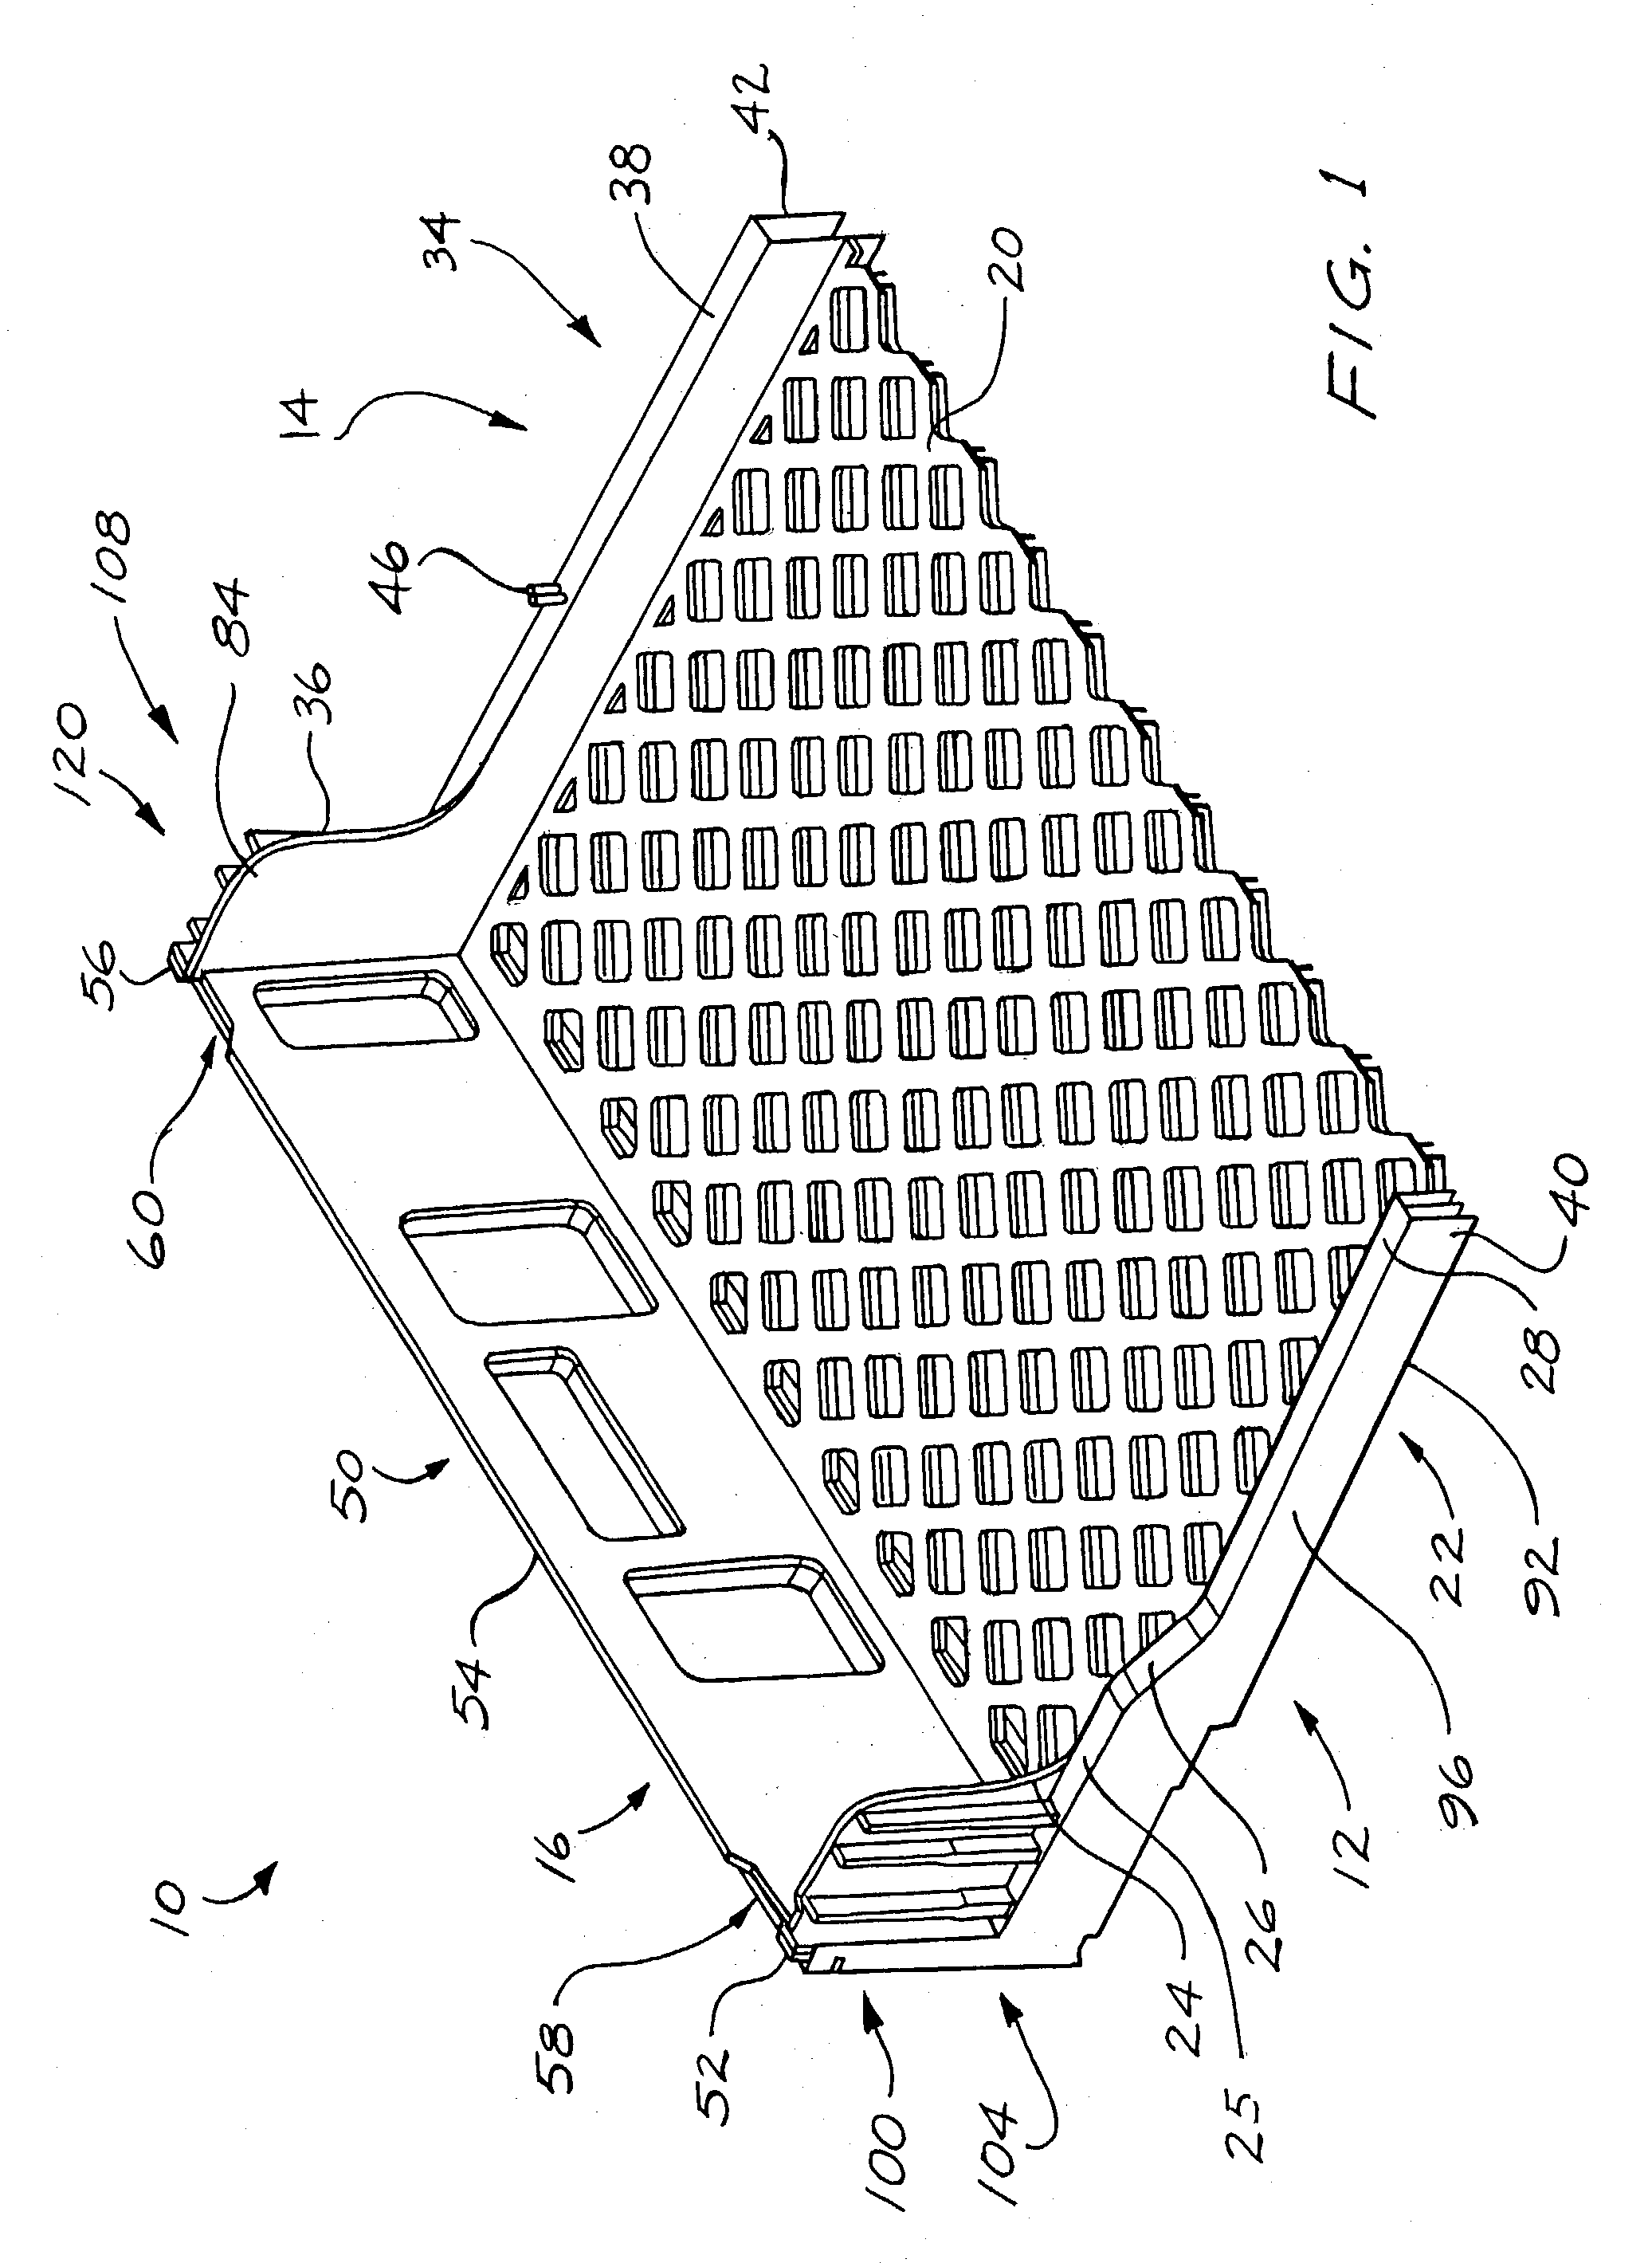 Stackable tray having prestressed sections